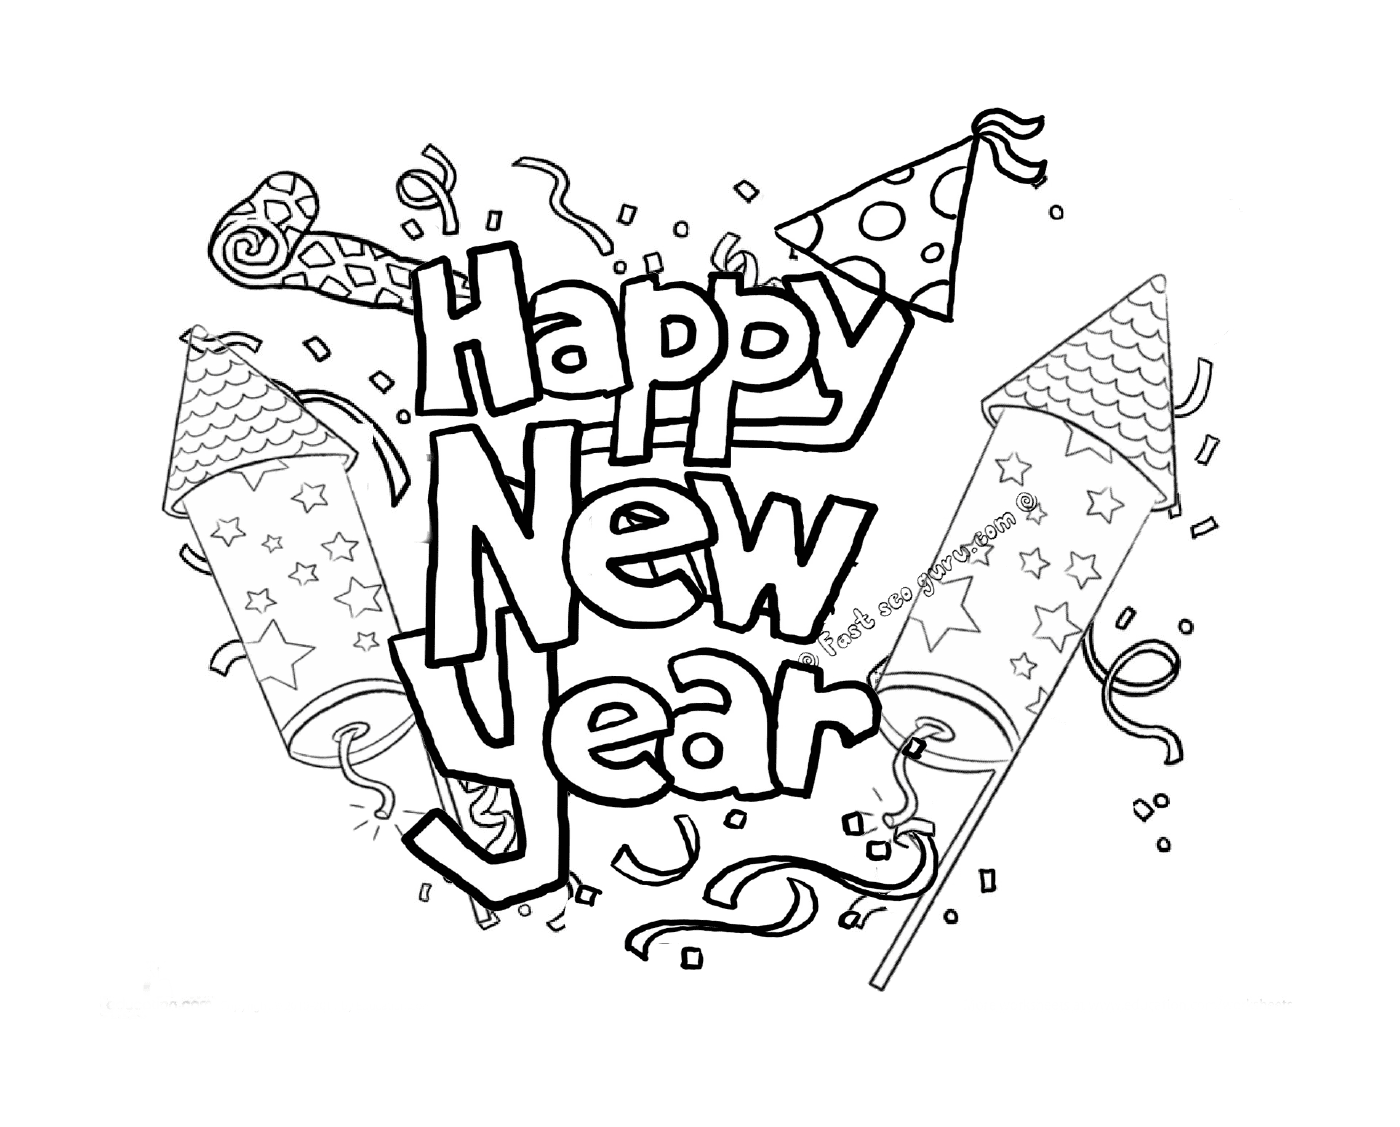  Printable Design for Happy New Year 2 